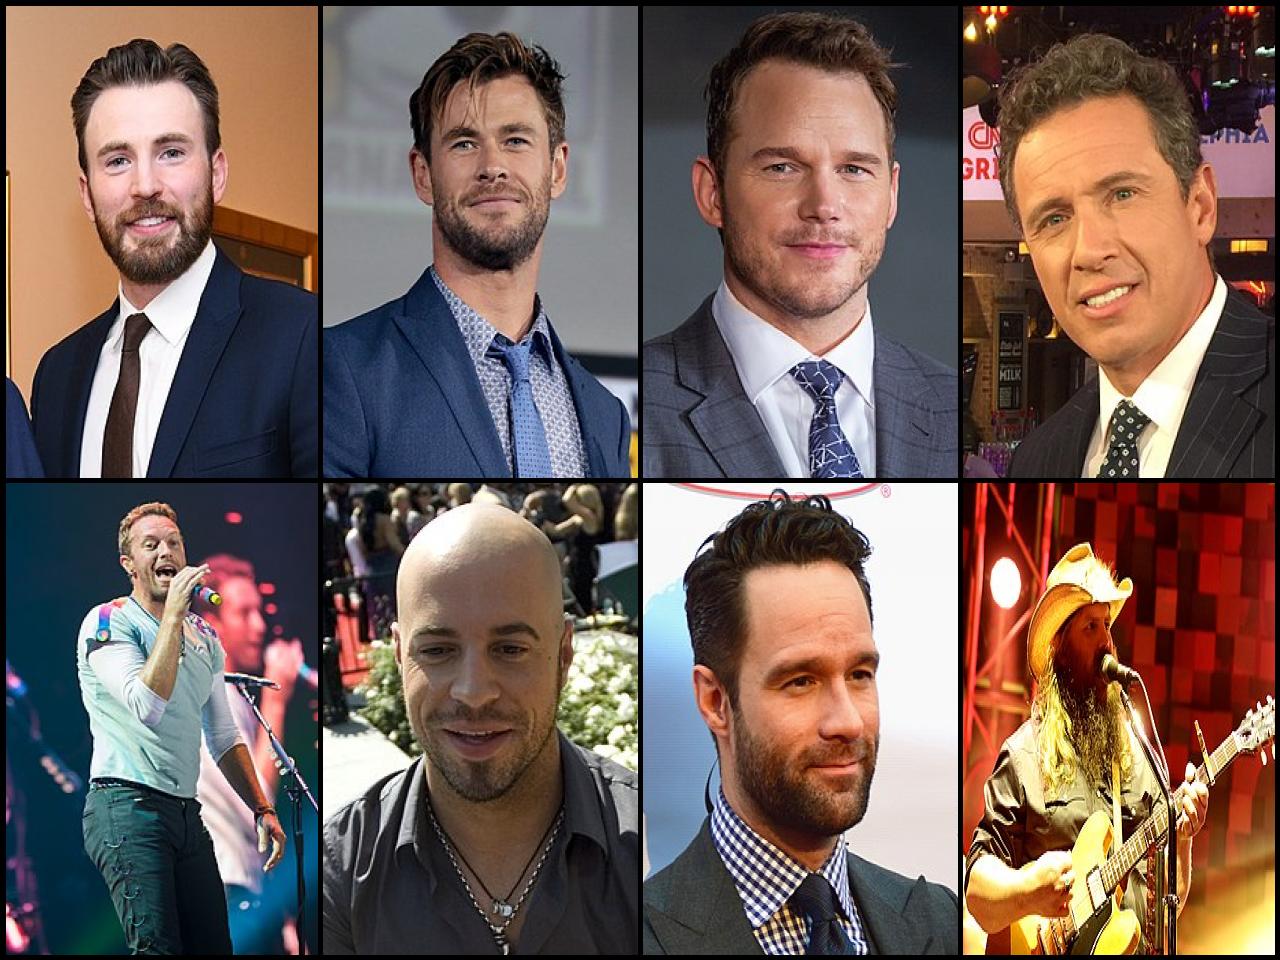 List of Famous people named <b>Chris</b>